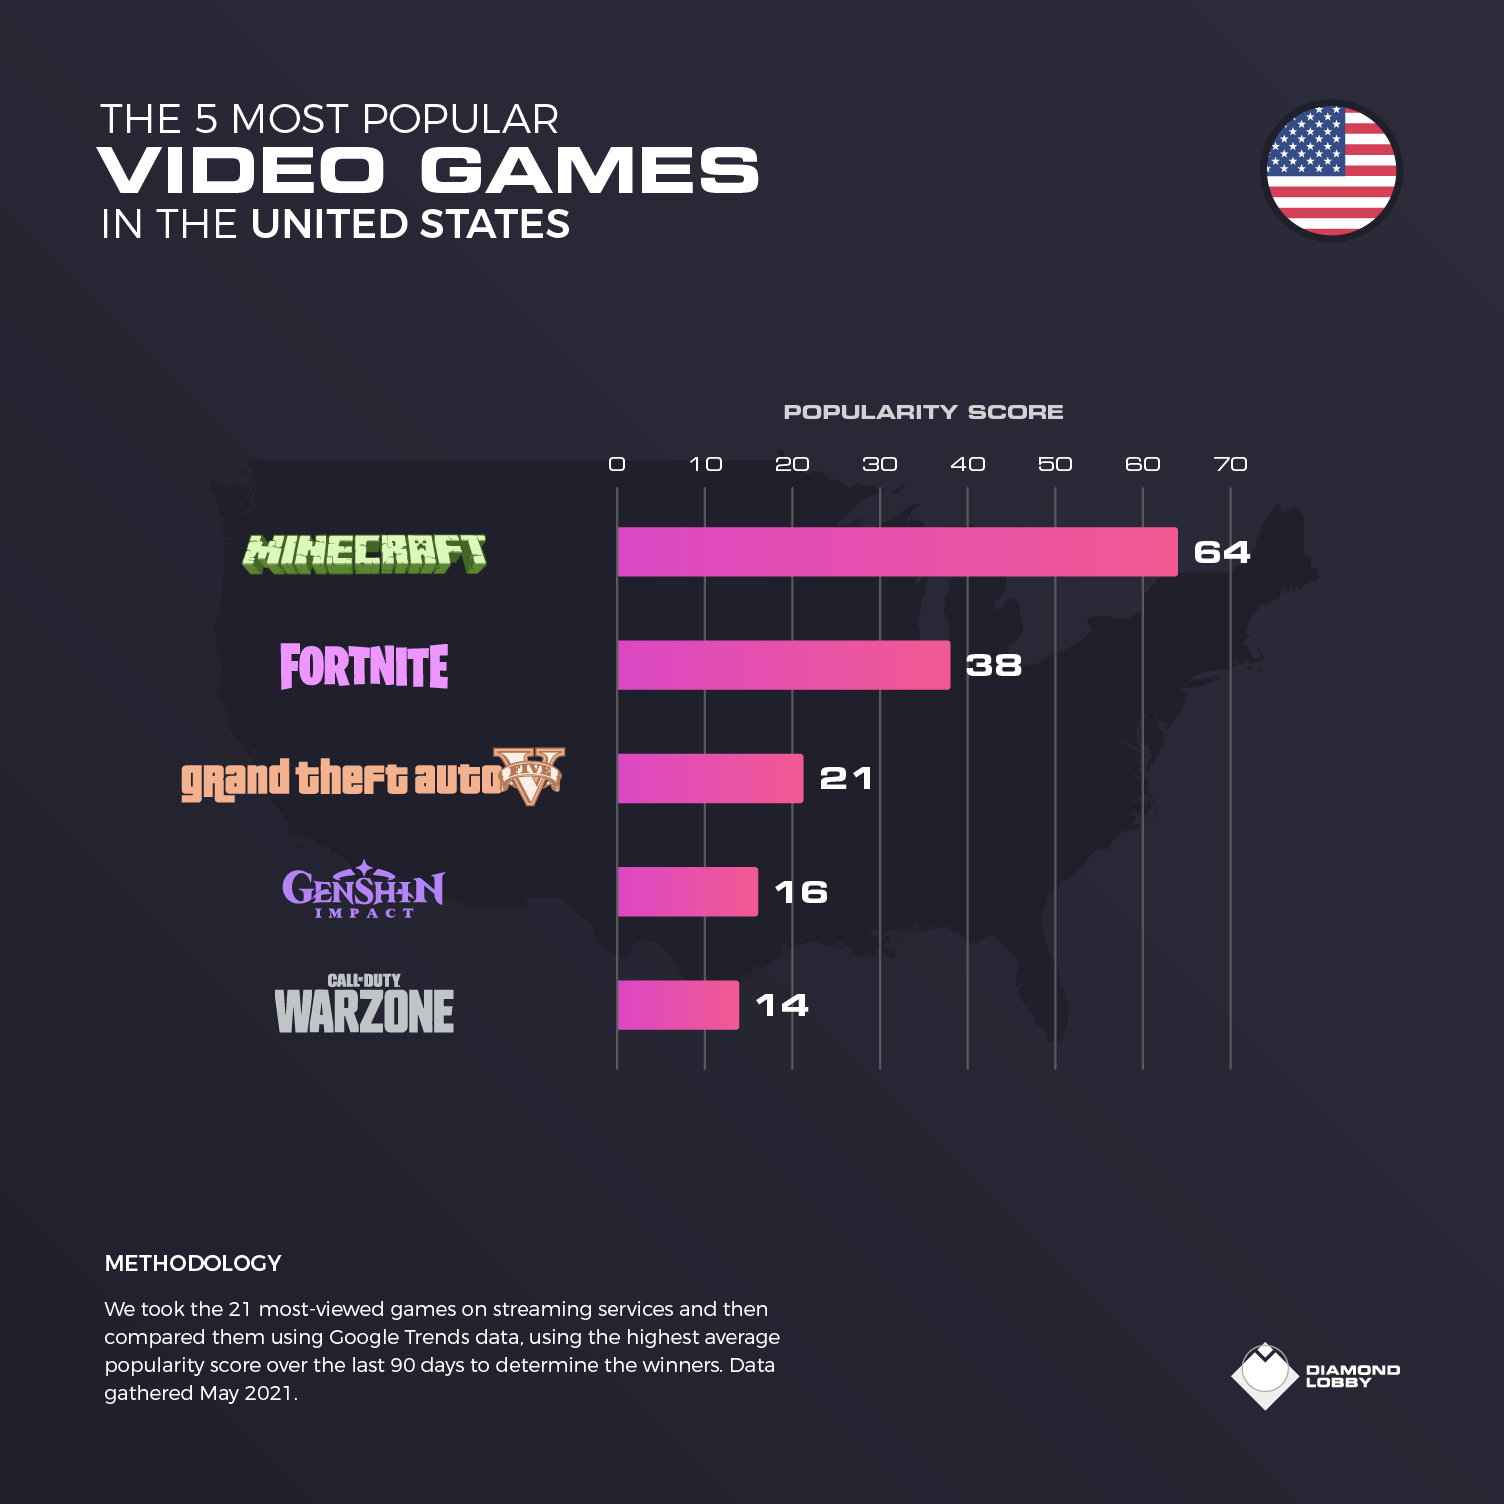 The top 5 video games in the United States